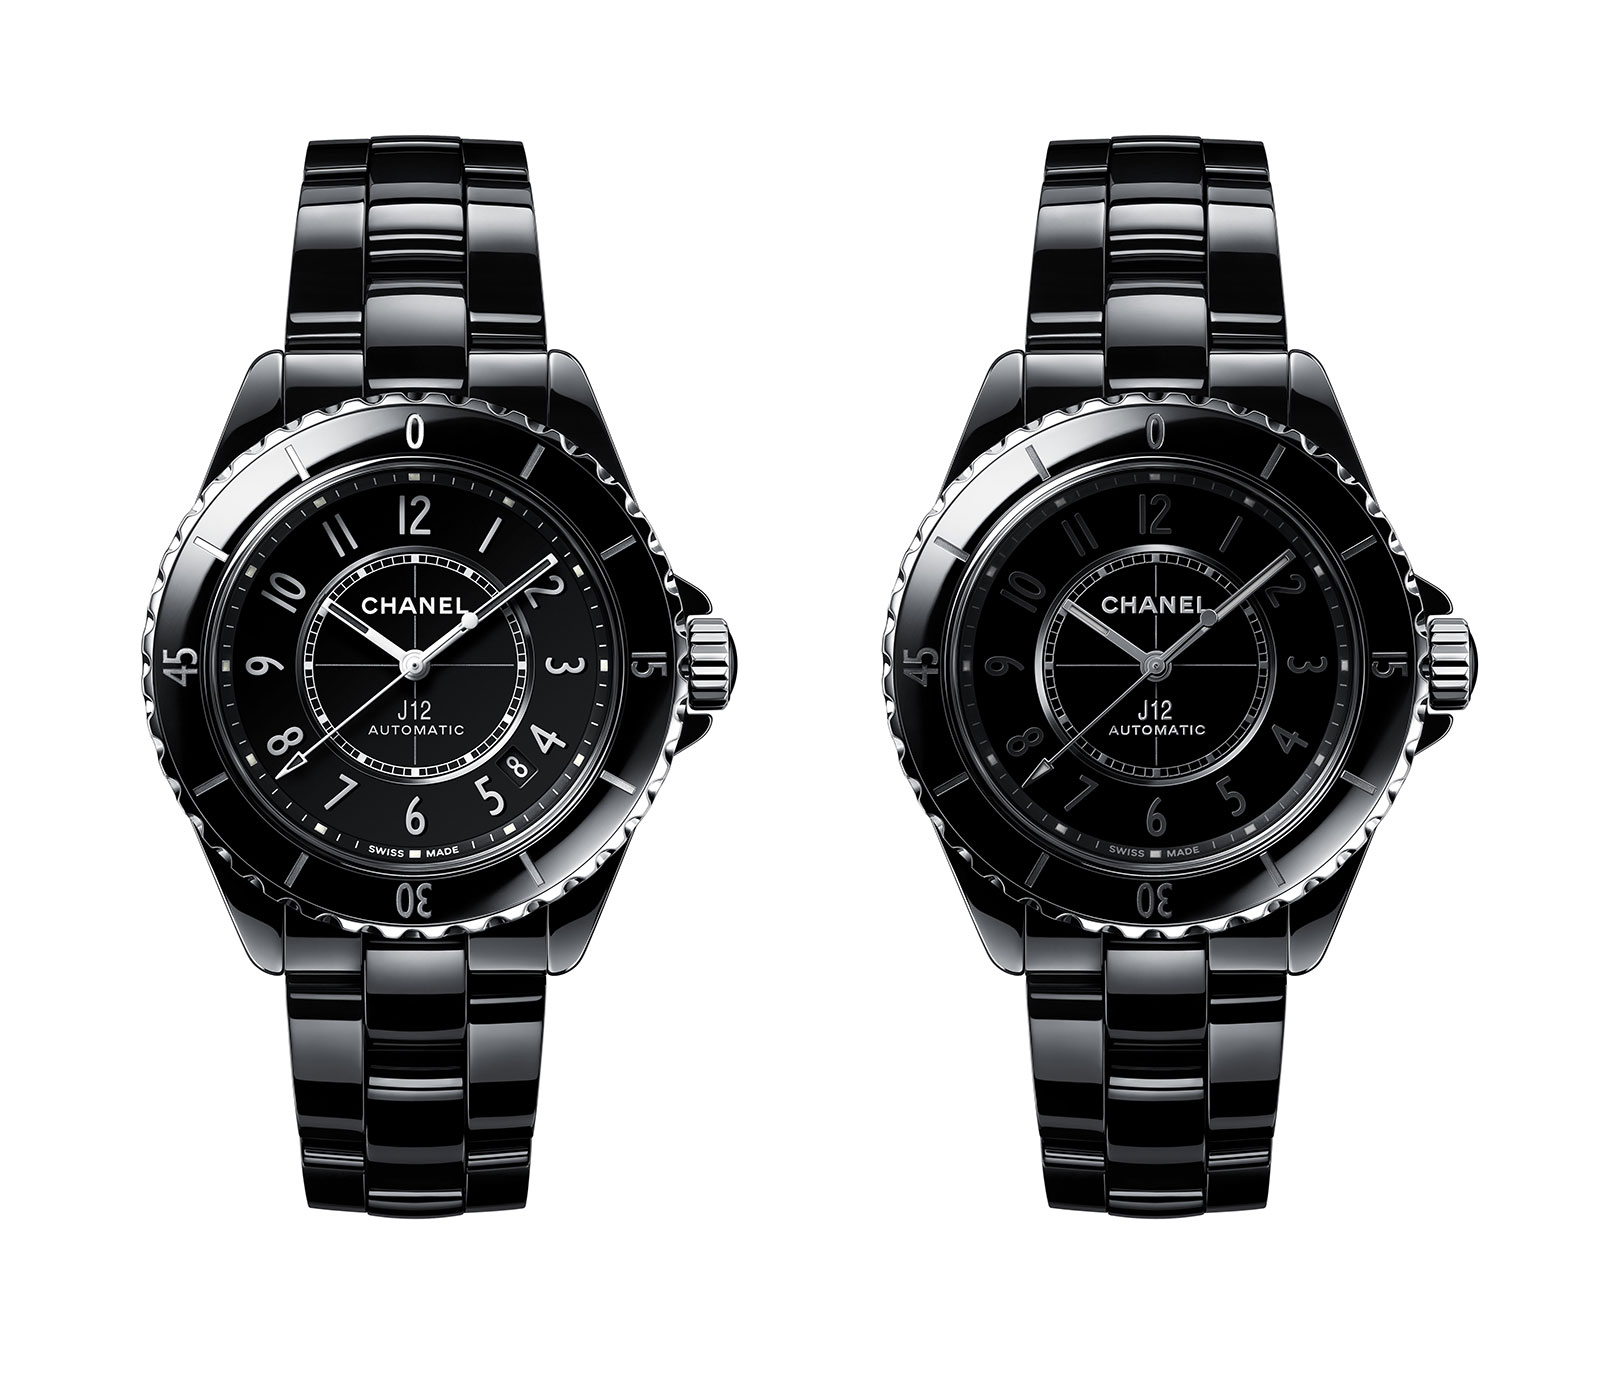 The New Chanel J12 with 'Manufacture' Movement – All You Need to